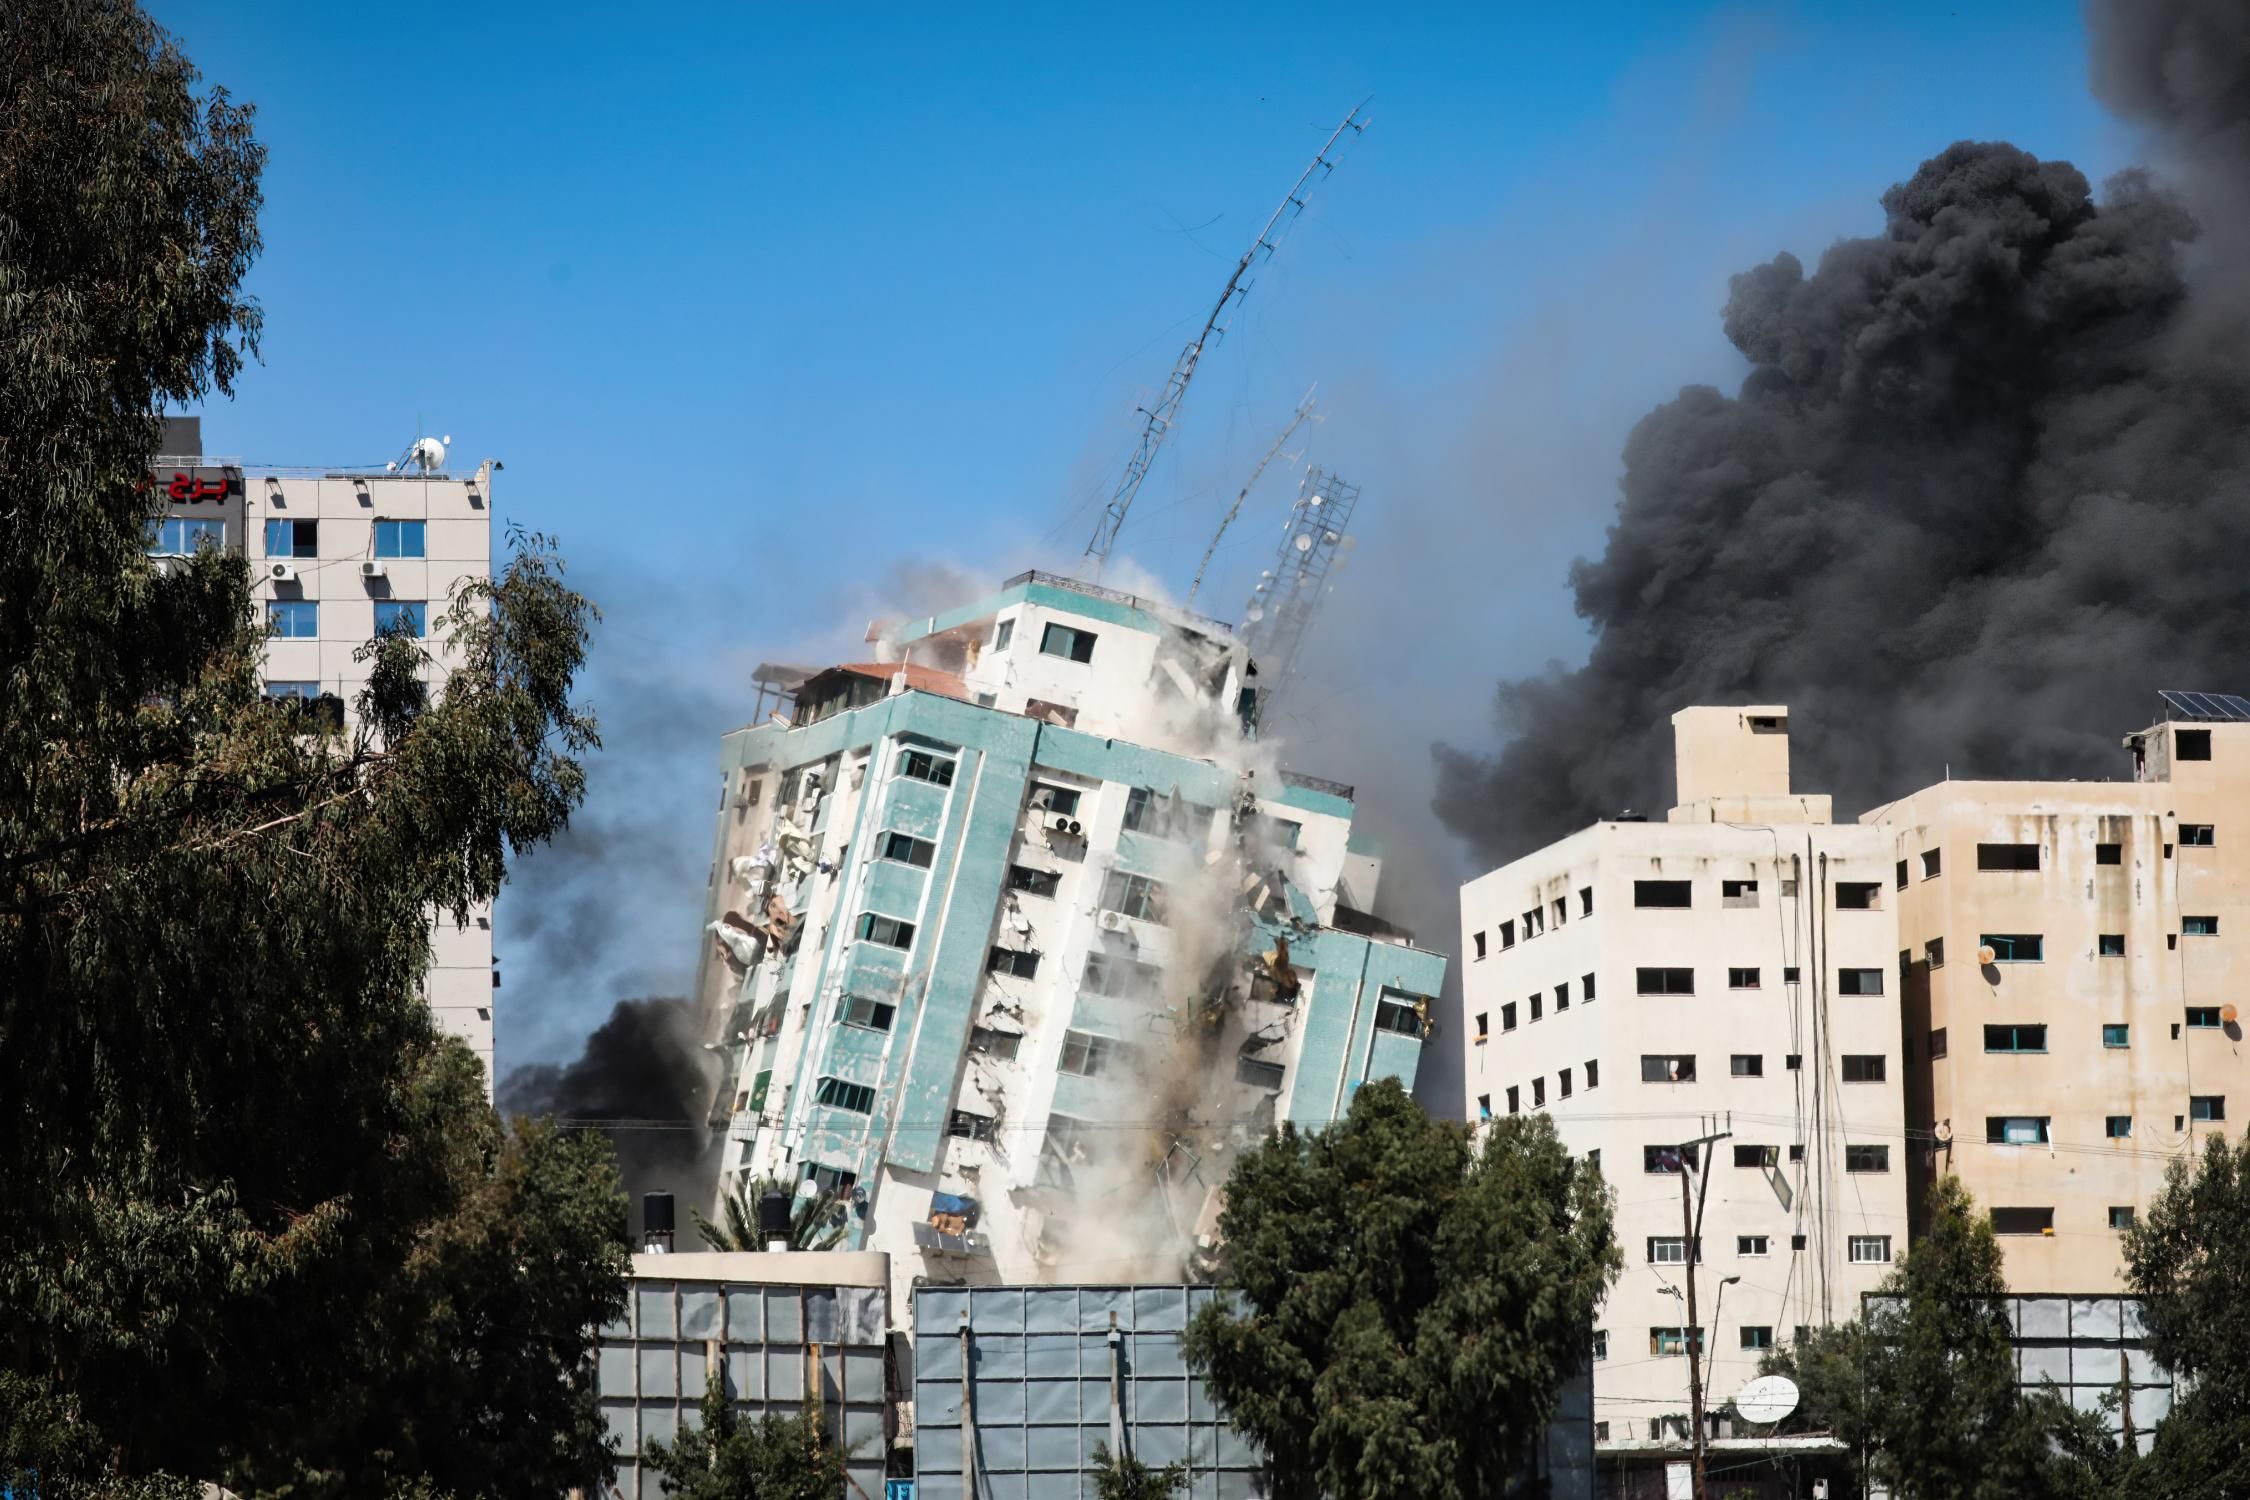 An Israeli airstrike destroys a high-rise building in Gaza City that housed several media outlets, including the Associated Press and Al-Jazeera.